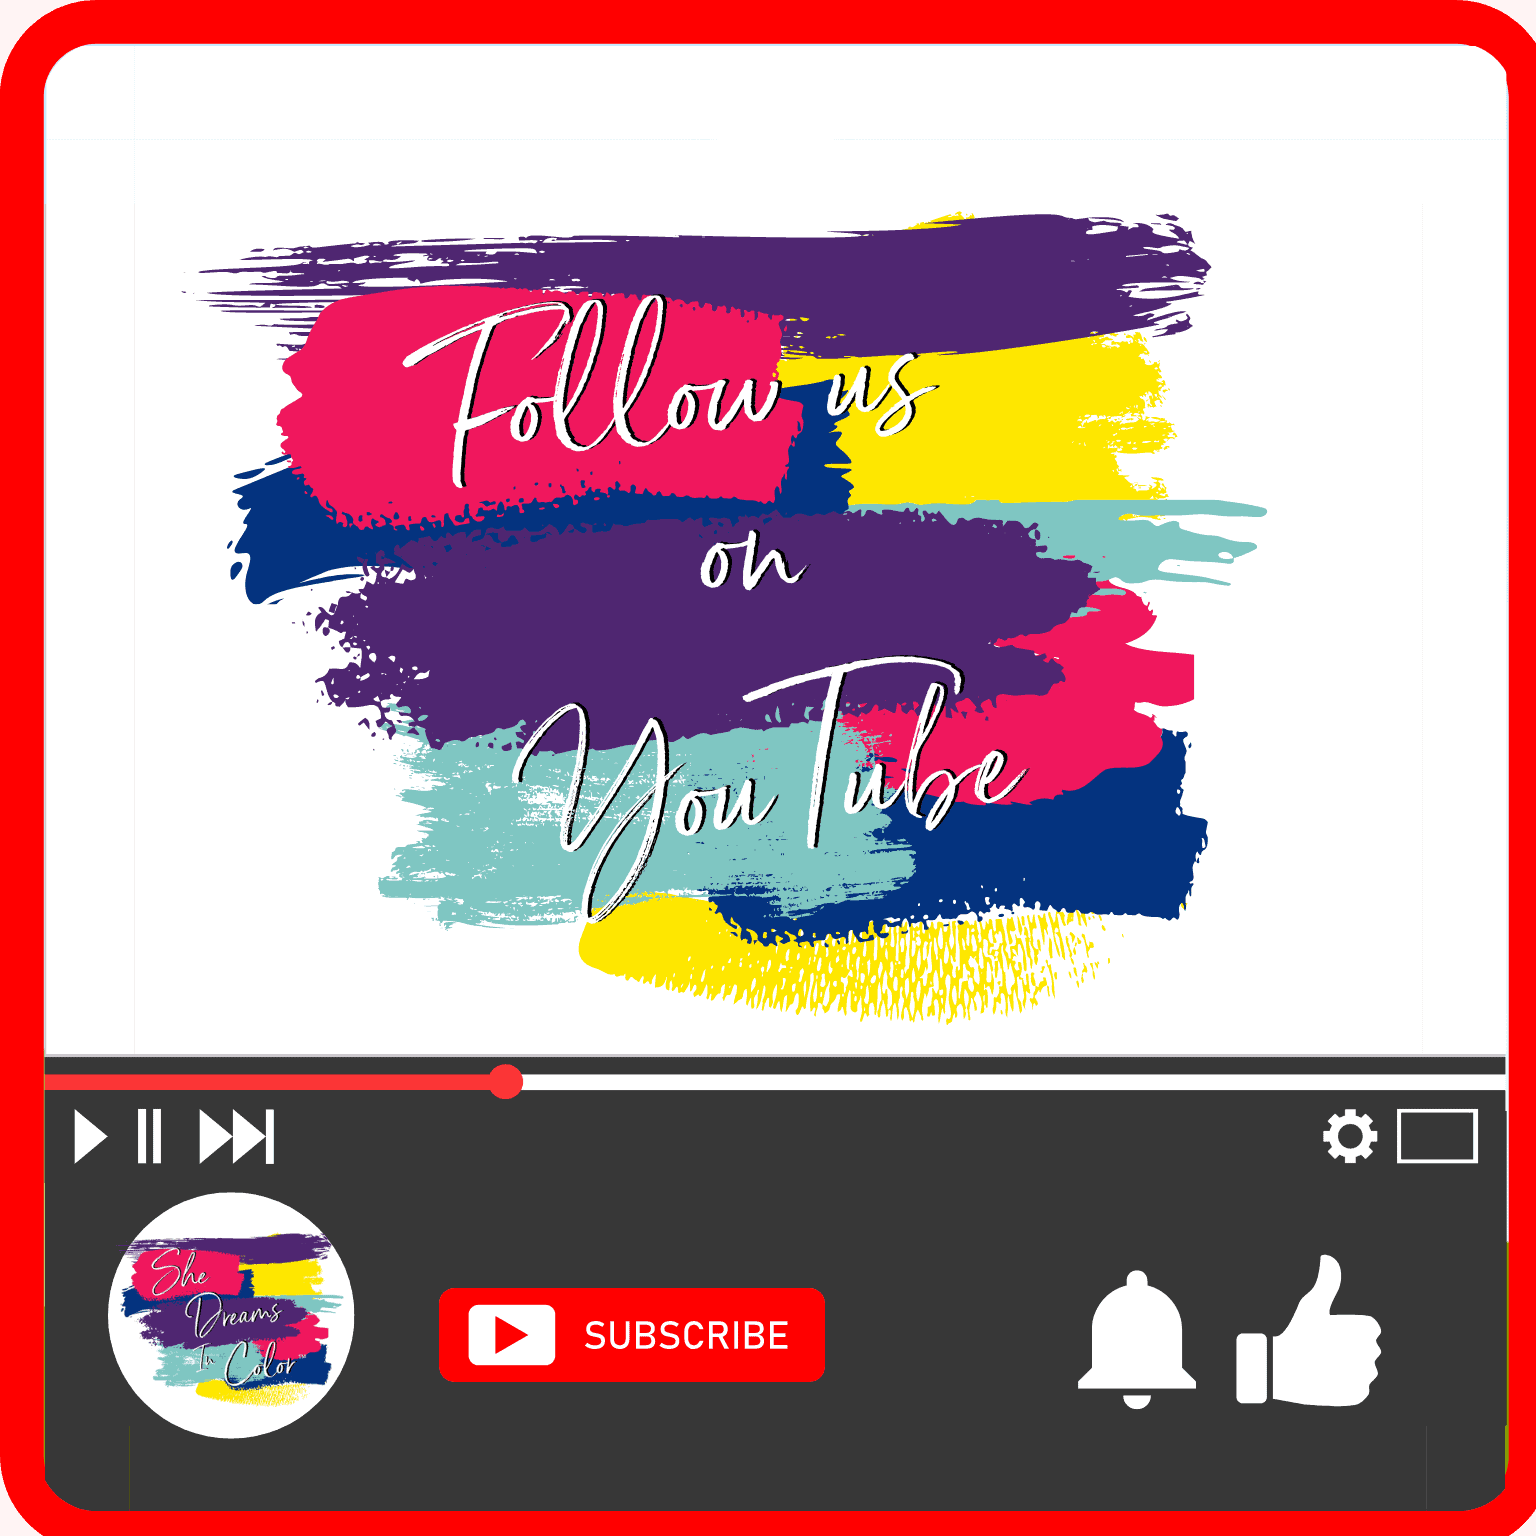 Follow She Dreams In Color video series on Youtube